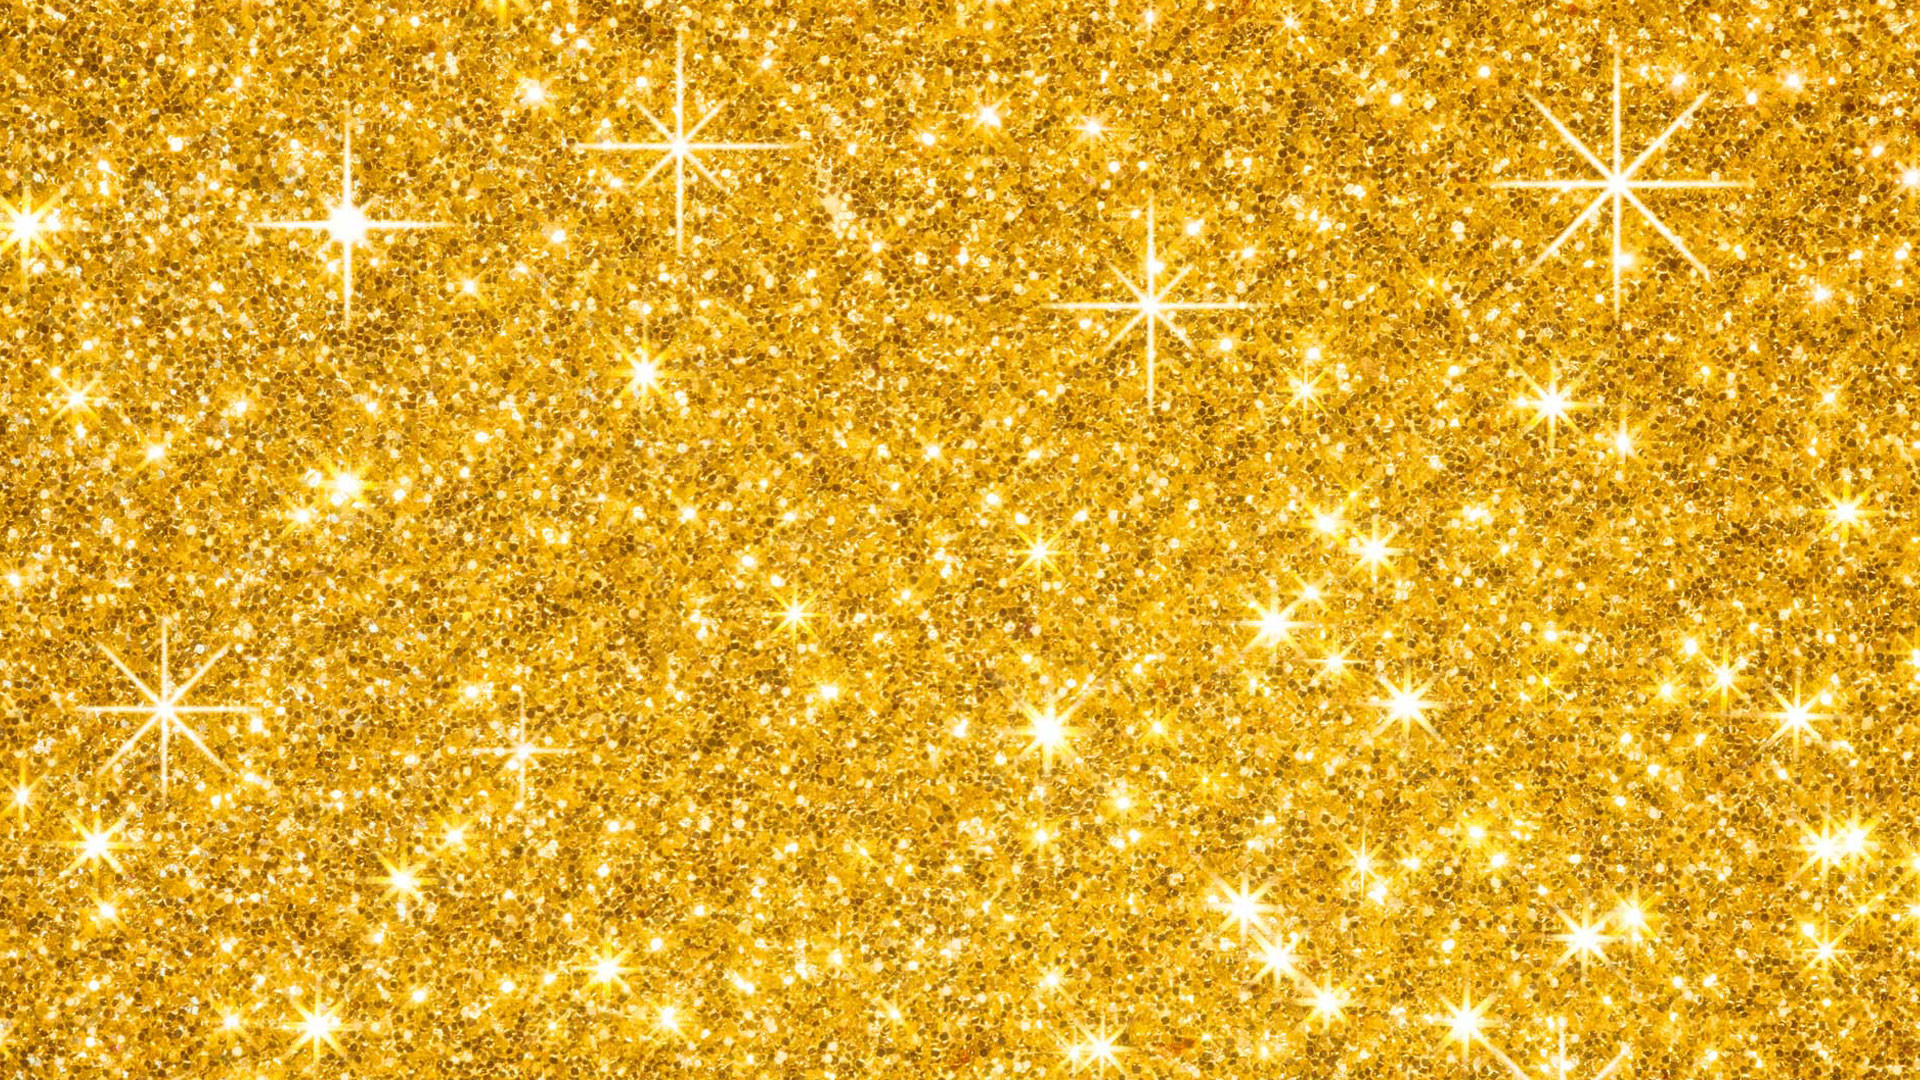 Gold Glitter Wallpaper 37 Images HD Wallpapers Download Free Images Wallpaper [wallpaper981.blogspot.com]